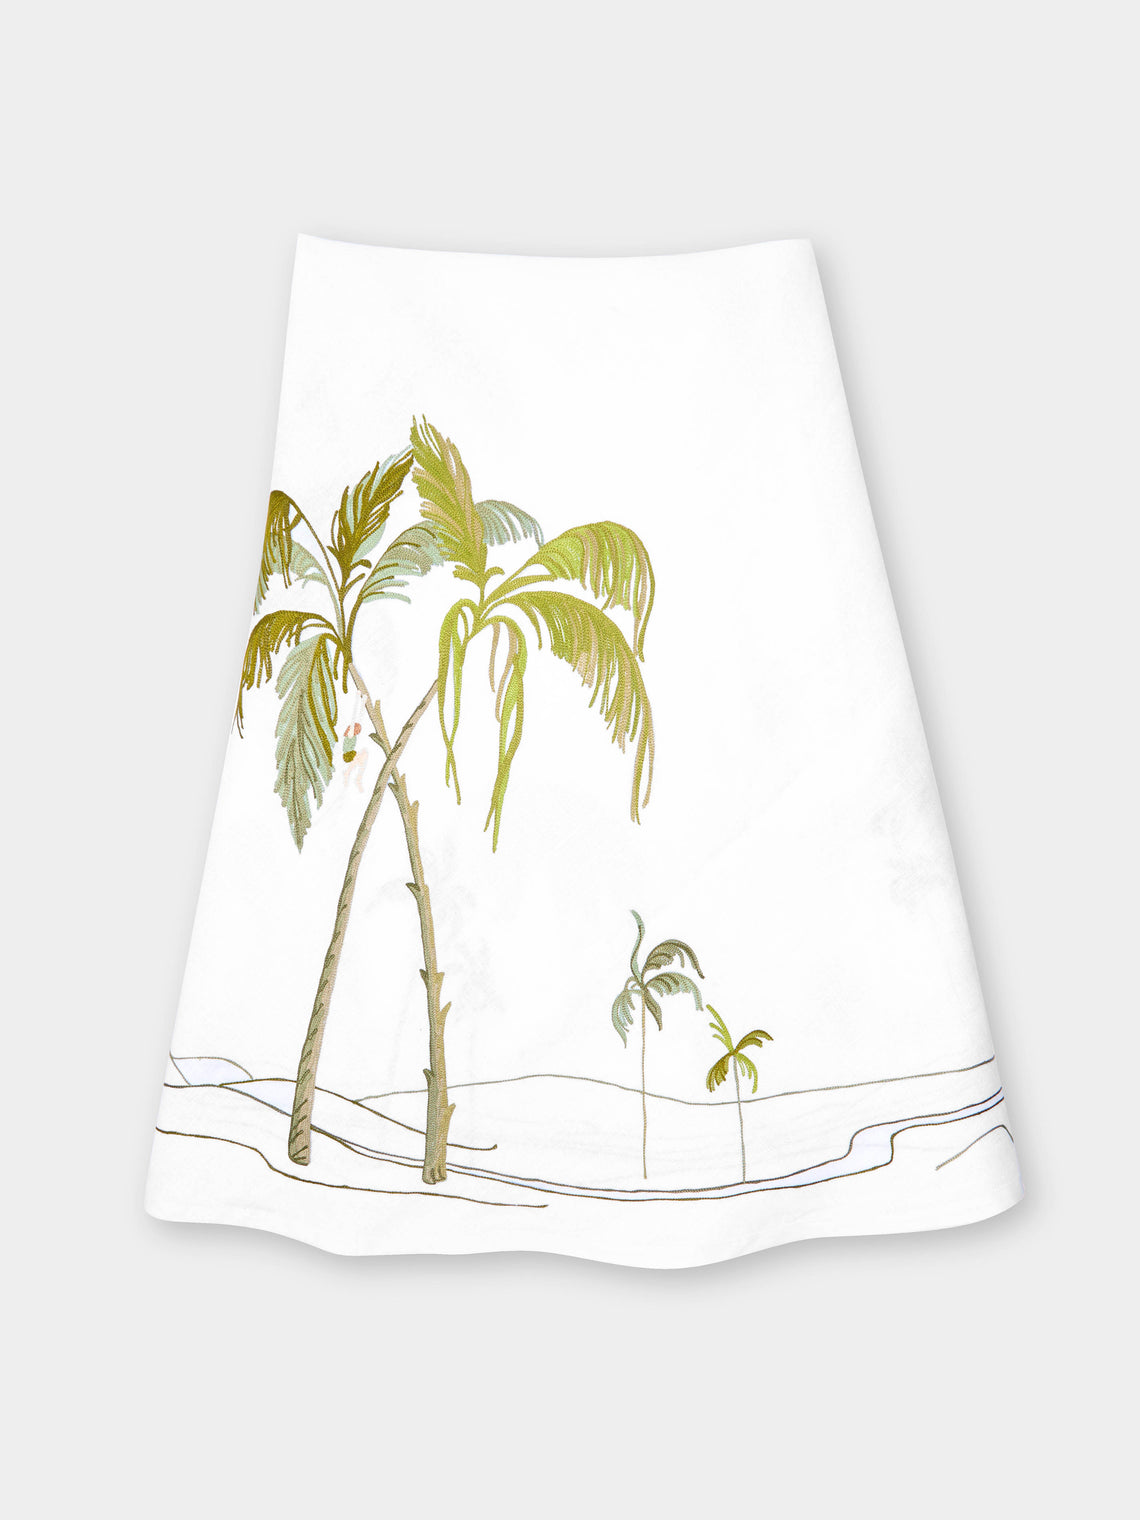 Loretta Caponi - Palm Tree Hand-Embroidered Linen Round Tablecloth -  - ABASK